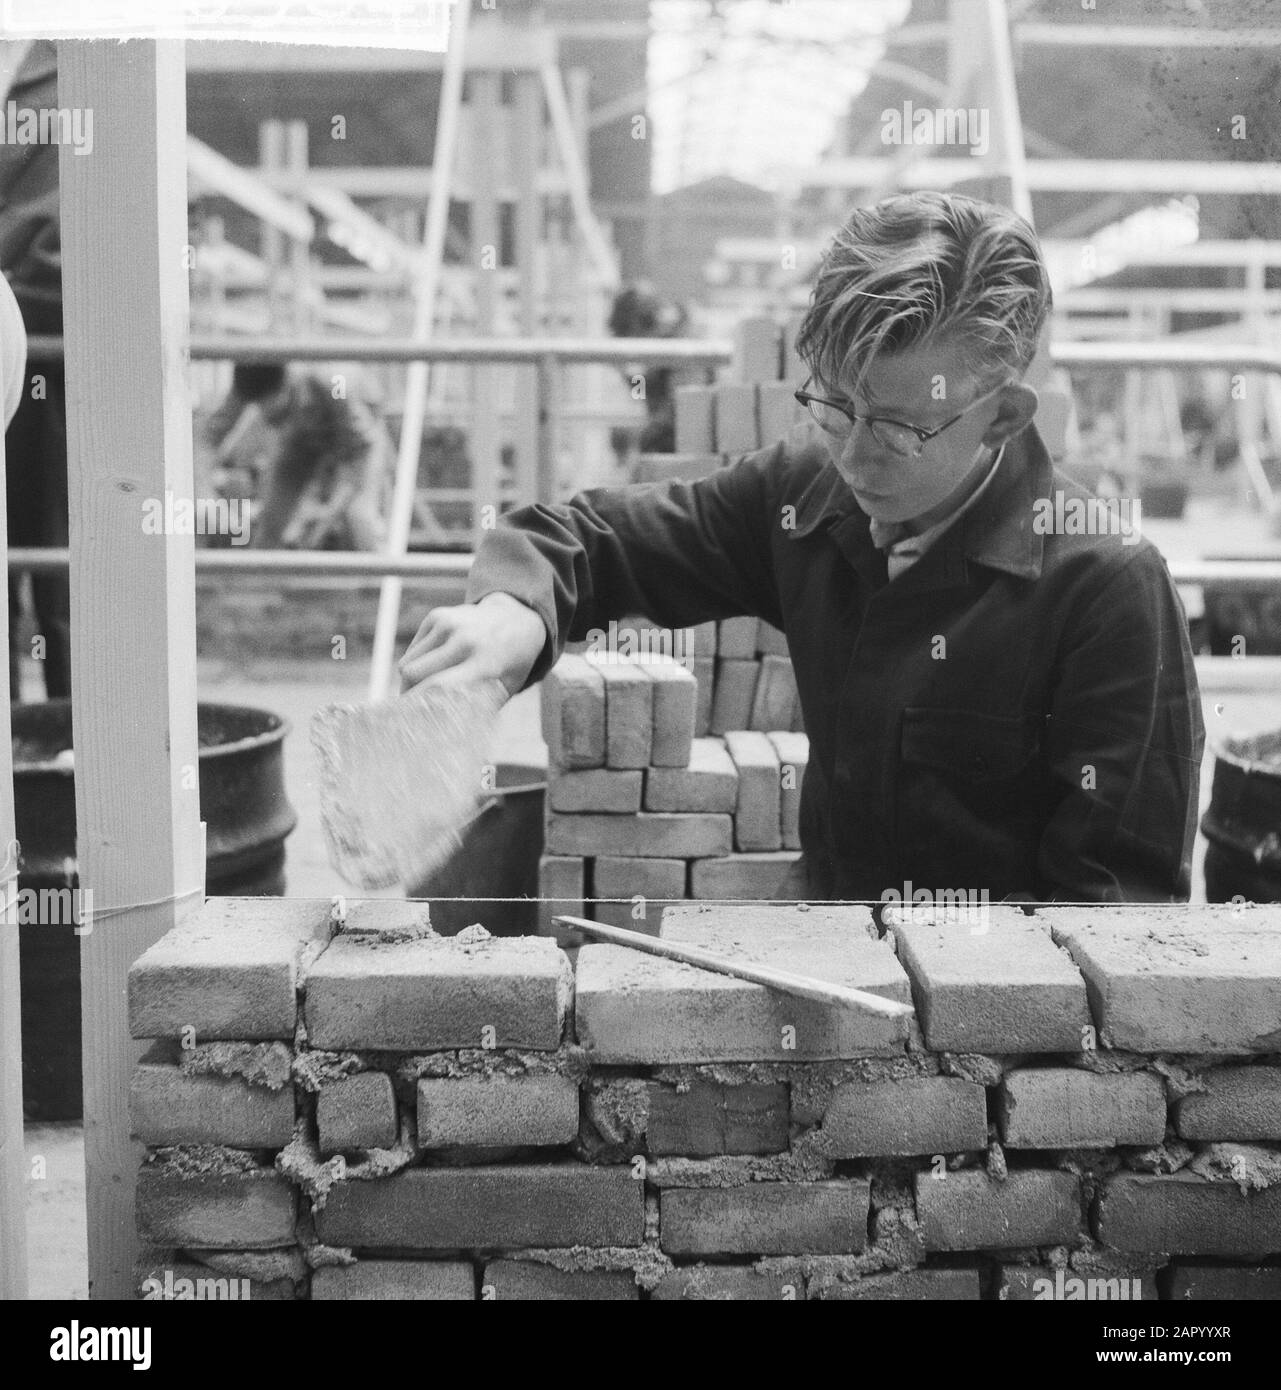 Masonry contest at the Ahoy Hall Date: July 3, 1961 Keywords: bricklaying Institution name: Ahoy Stock Photo